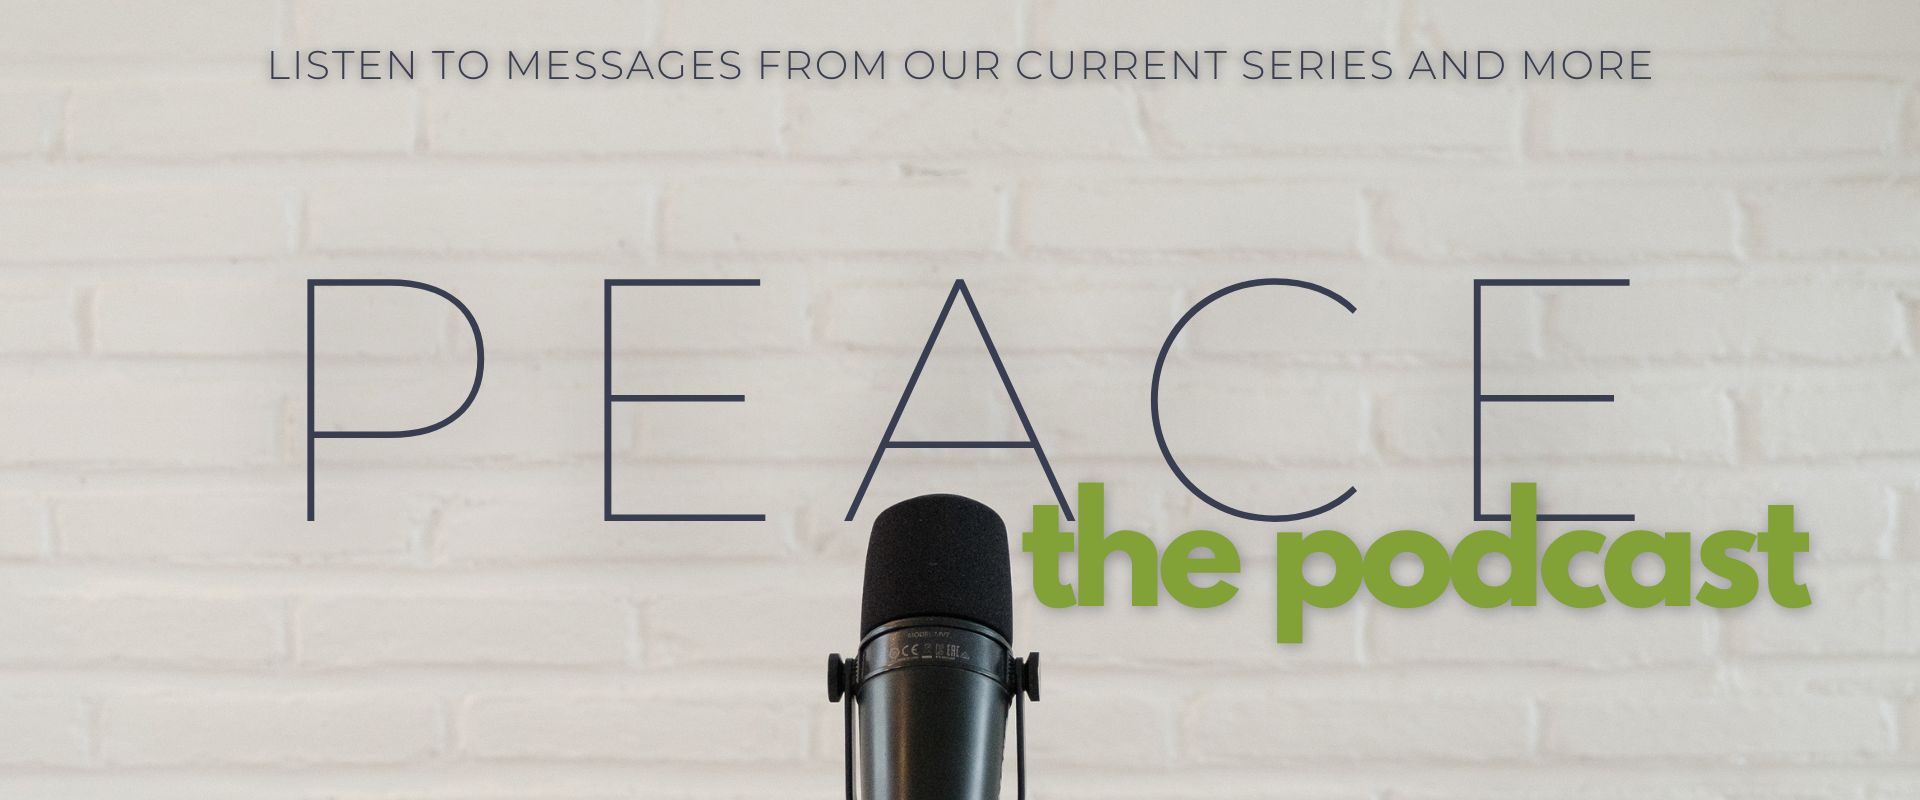 peace the podcast